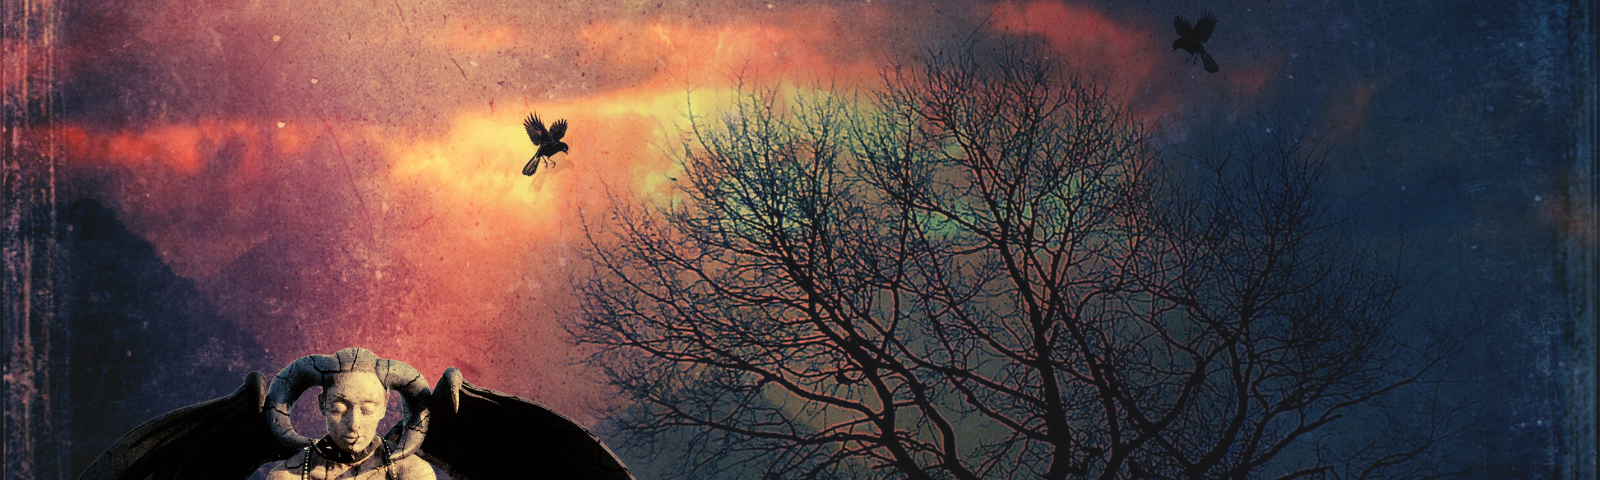 Female Gargoyle crouches down with eyes closed as the sun sets behind her. Background of a mountain landscape with leafless tree with crows flying around it.